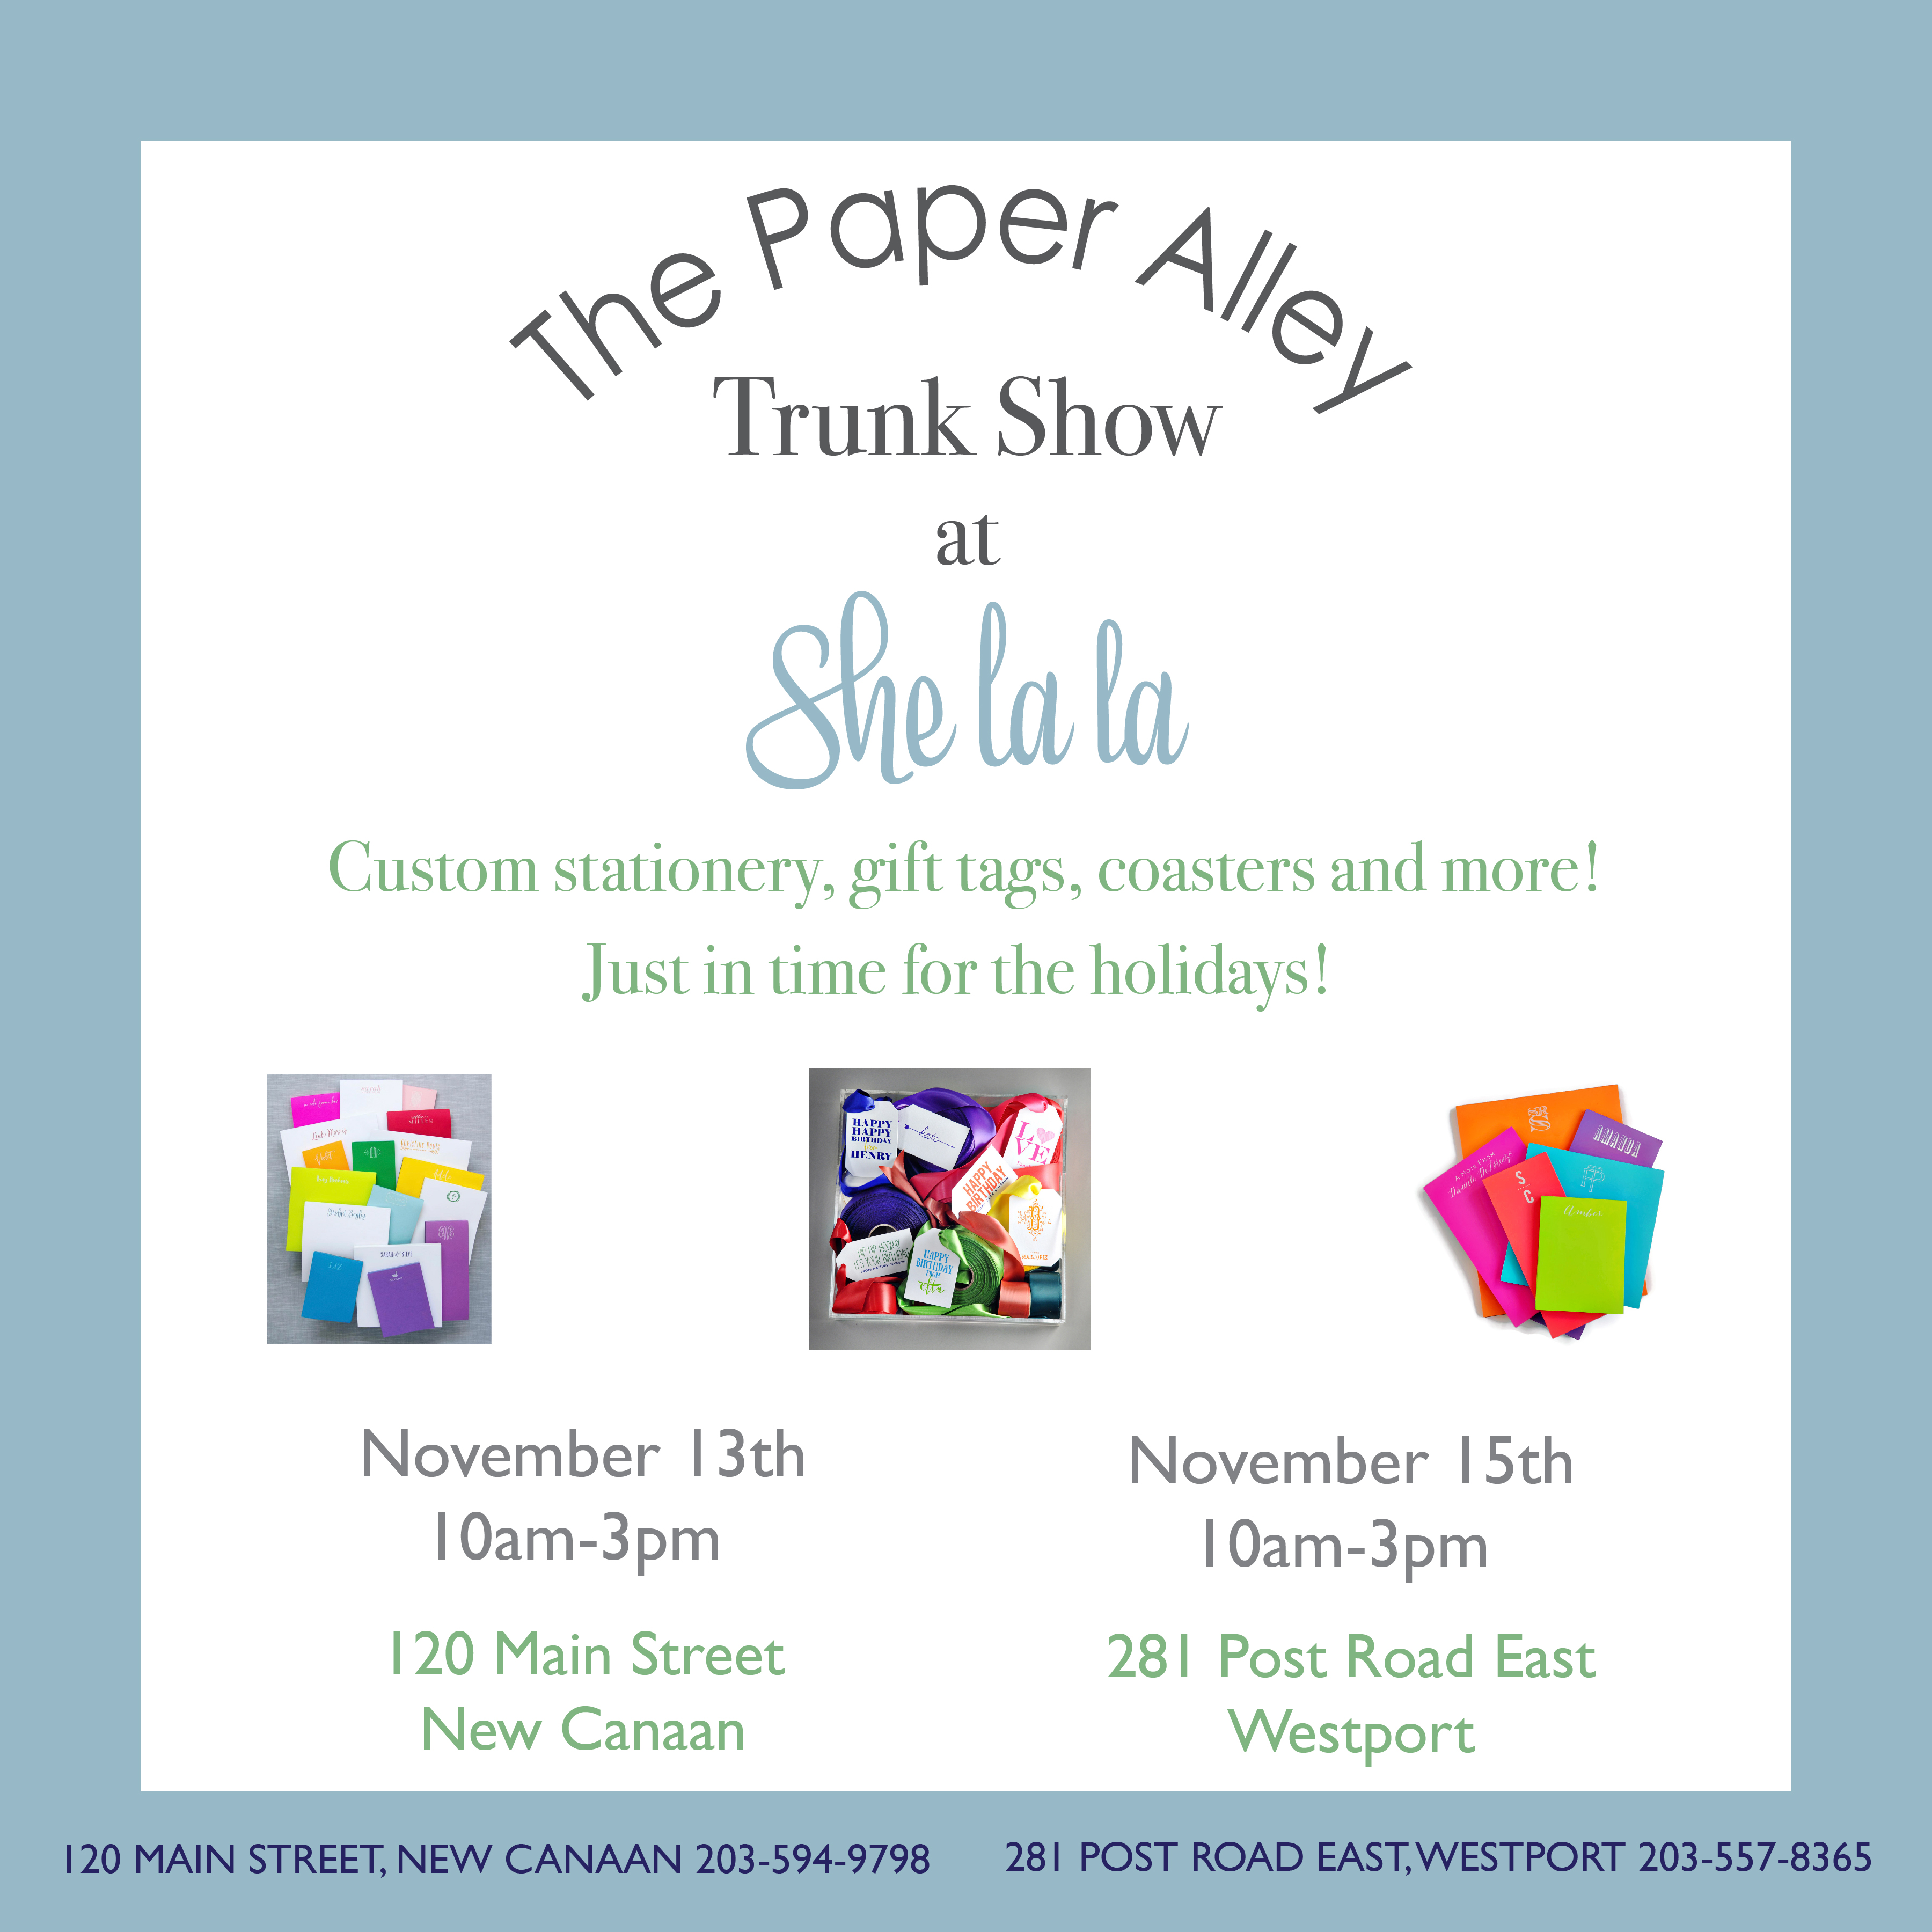 Paper Alley Trunk Show Ad